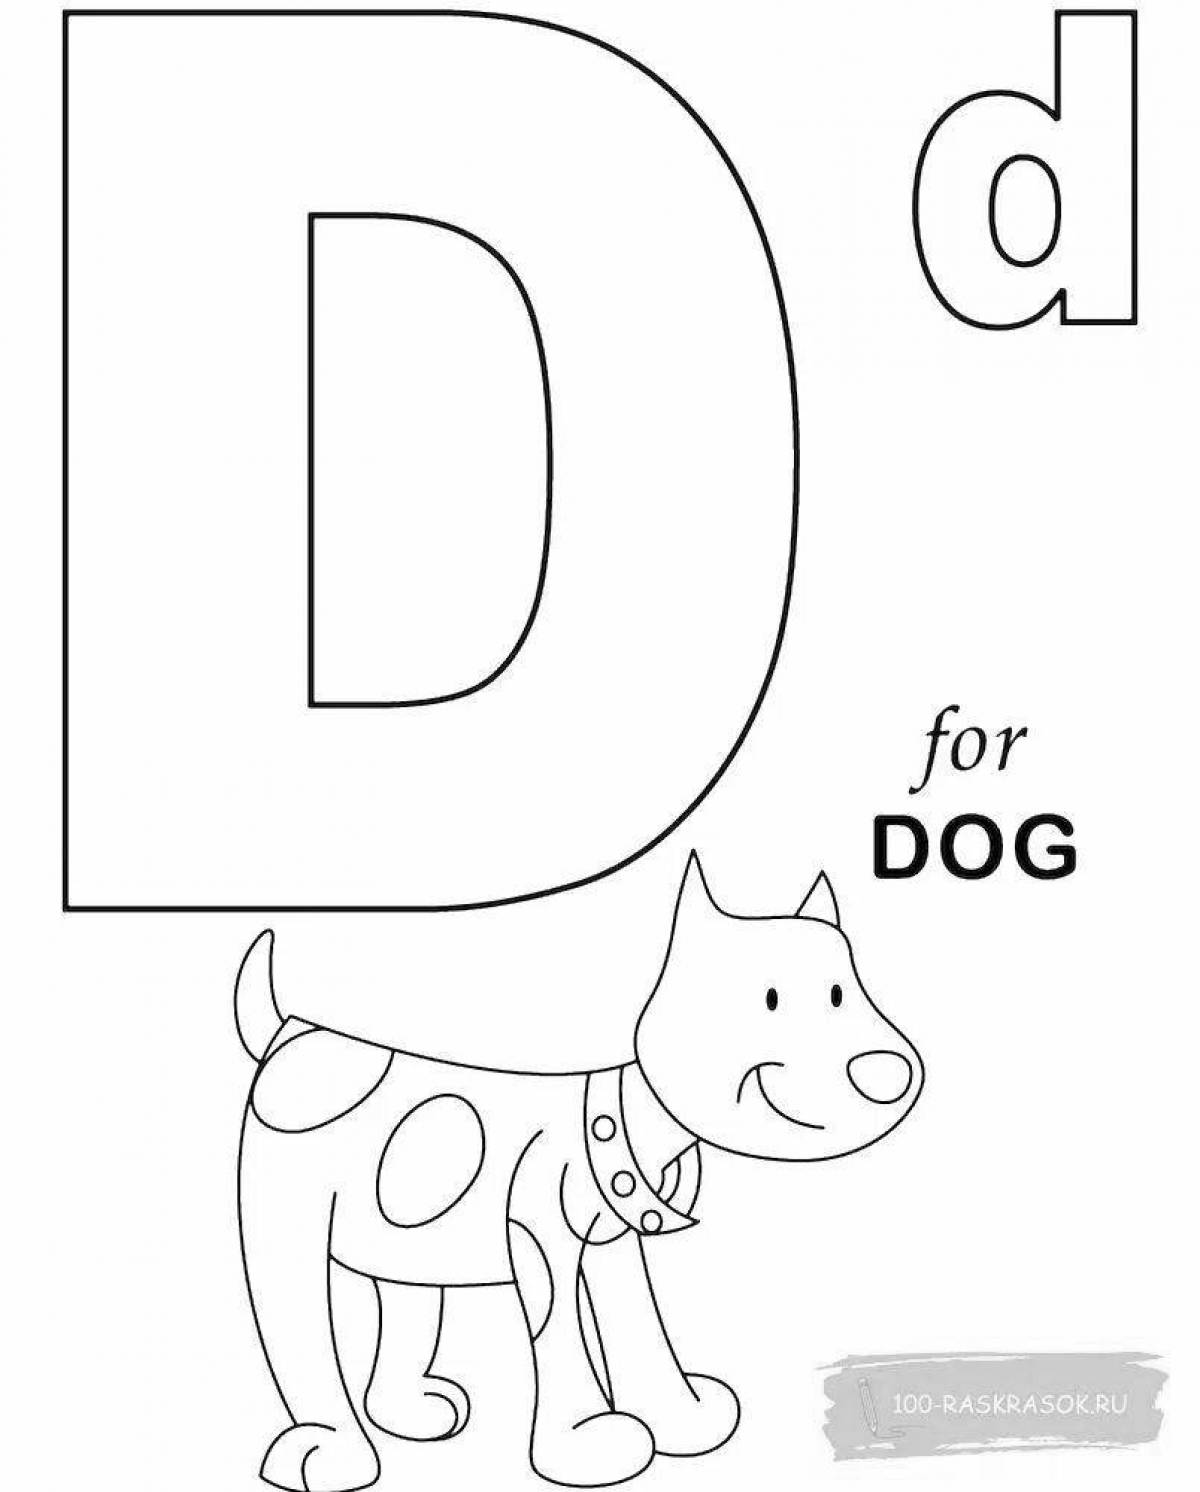 Playful abcd coloring page